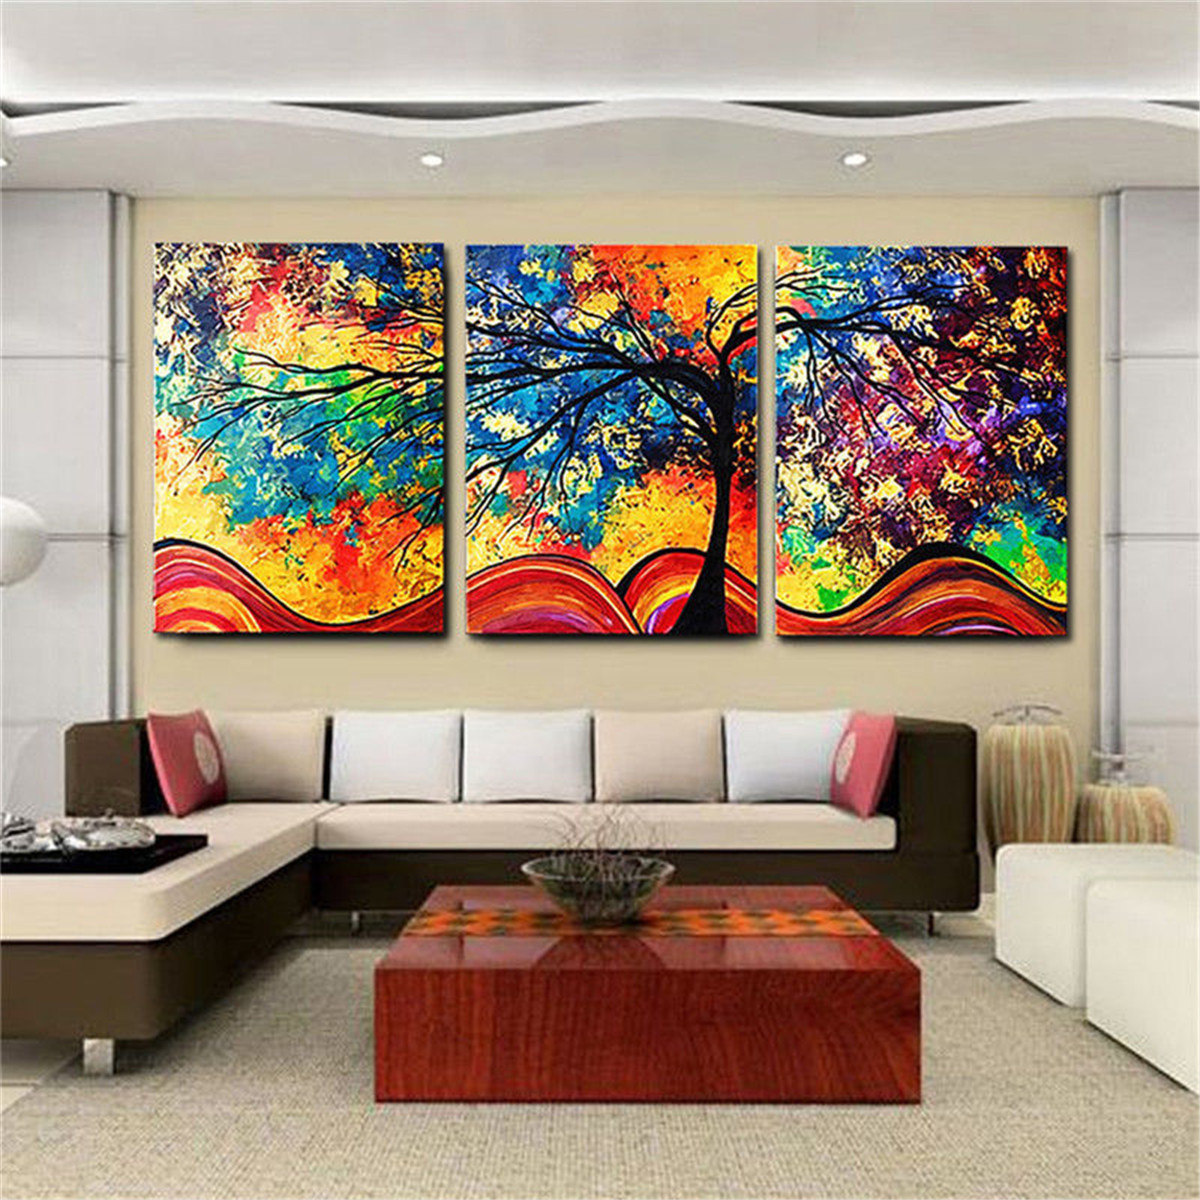 3Pcs-Colorful-Tree-HD-Canvas-Print-Paintings-Wall-Decorative-Print-Art-Pictures-FramedFrameless-Wall-1187263-9